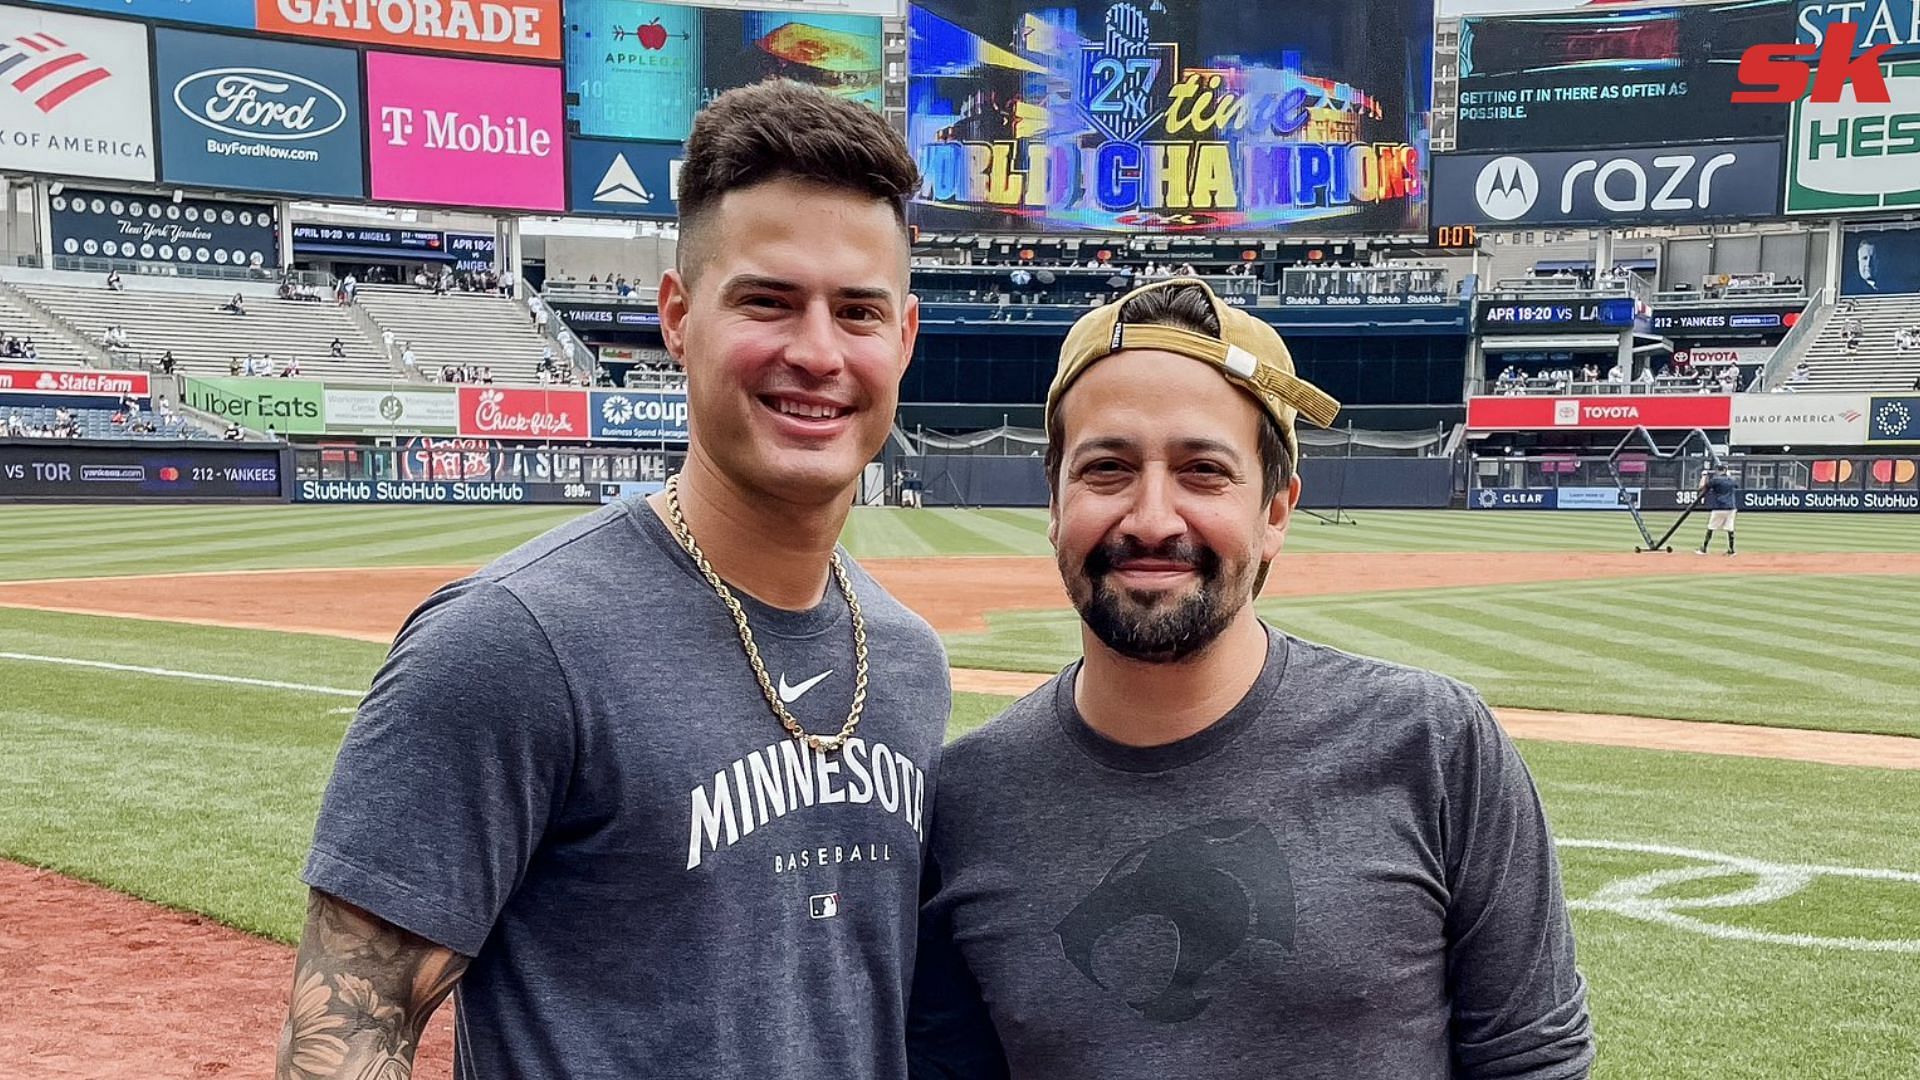 Lin-Manuel Miranda has lovely reaction after Twins call up his cousin